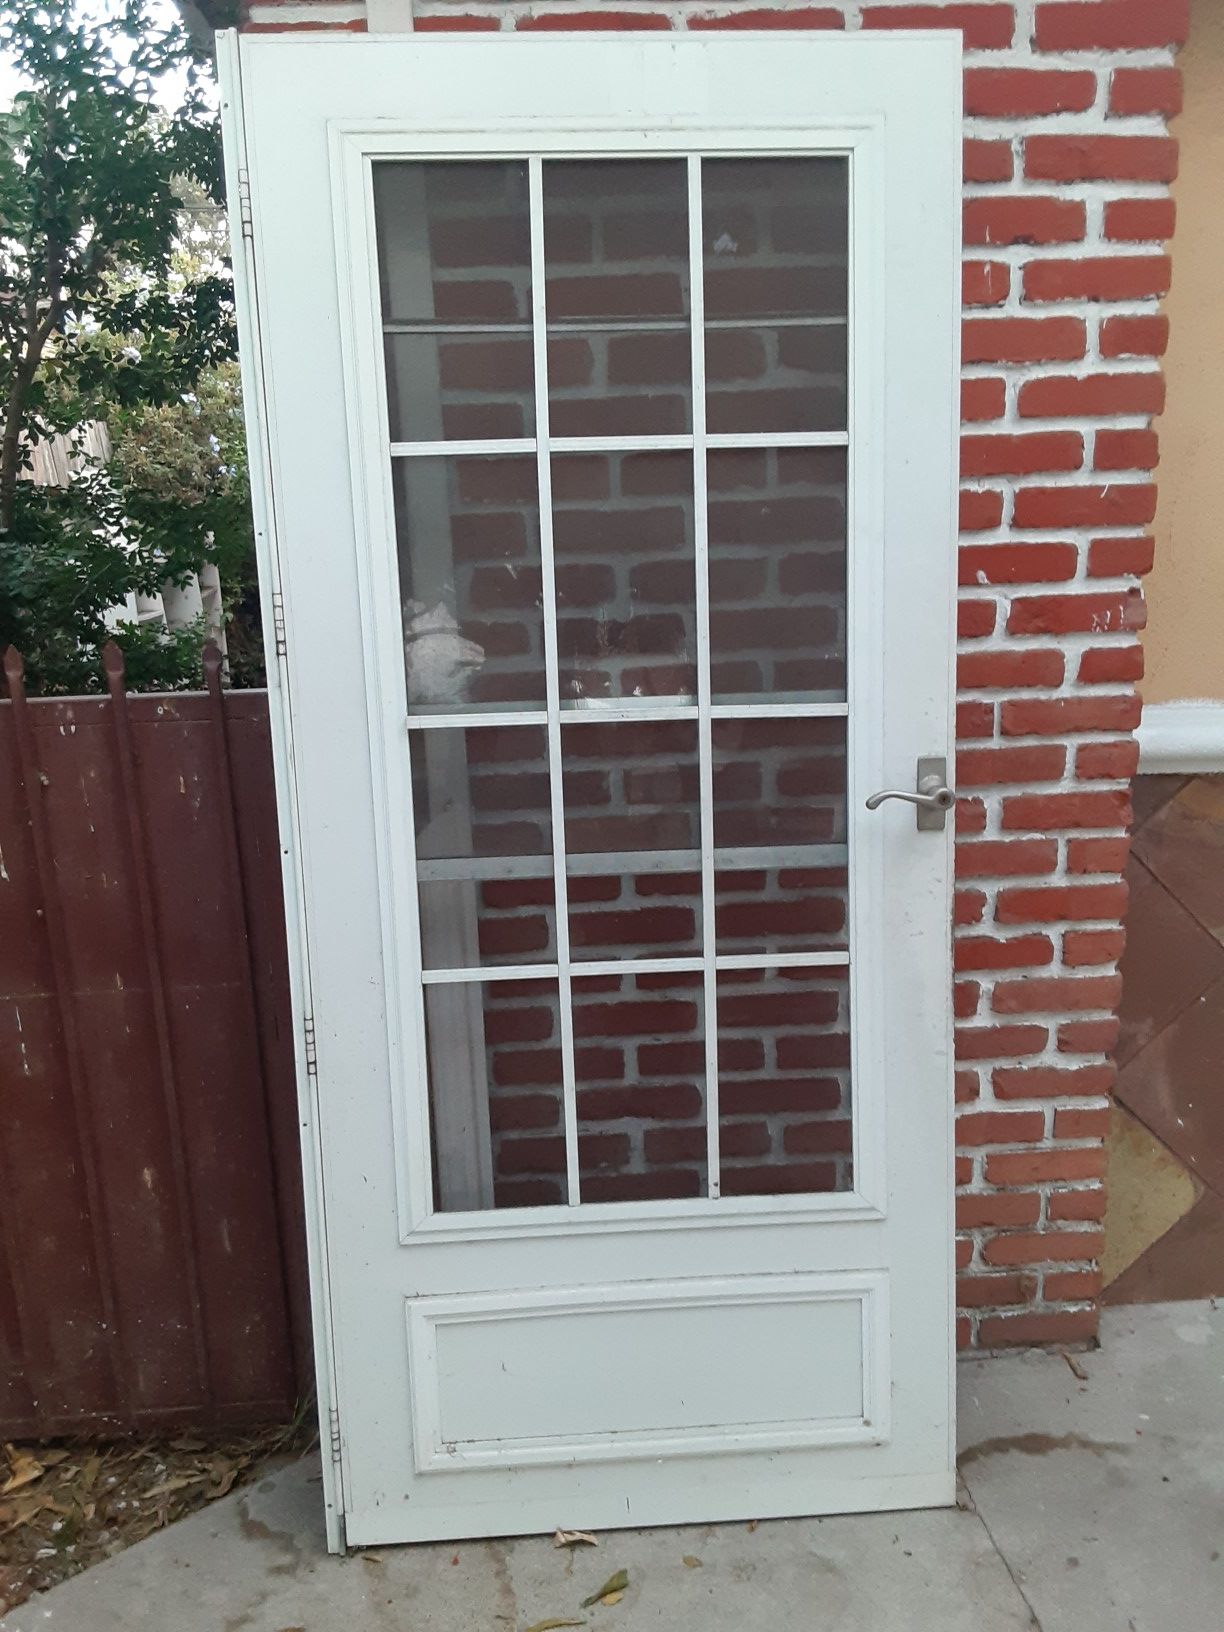 Heavy duty screen door 36 by 80 with windows that open up and down